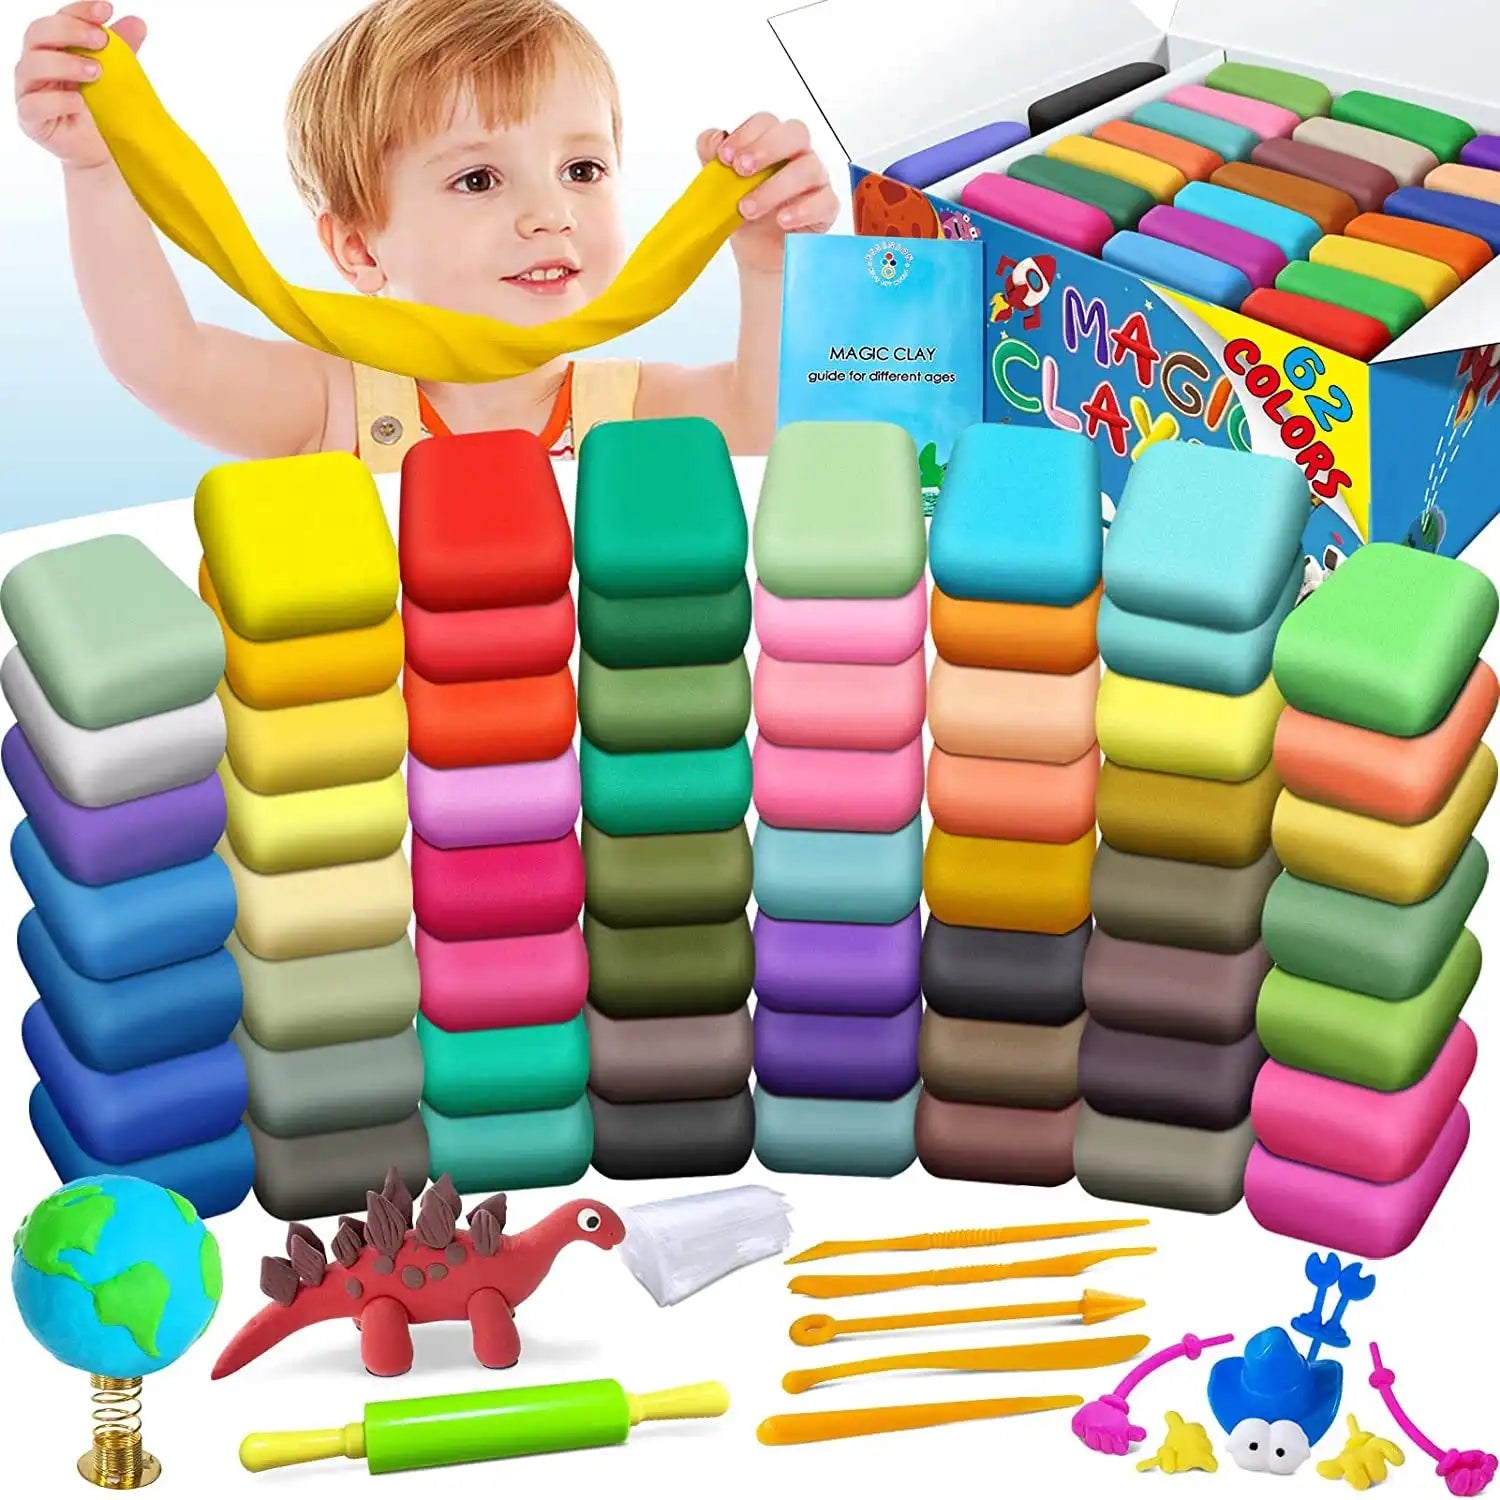 Modeling Clay Kit - 62 Colors Air Dry Magic